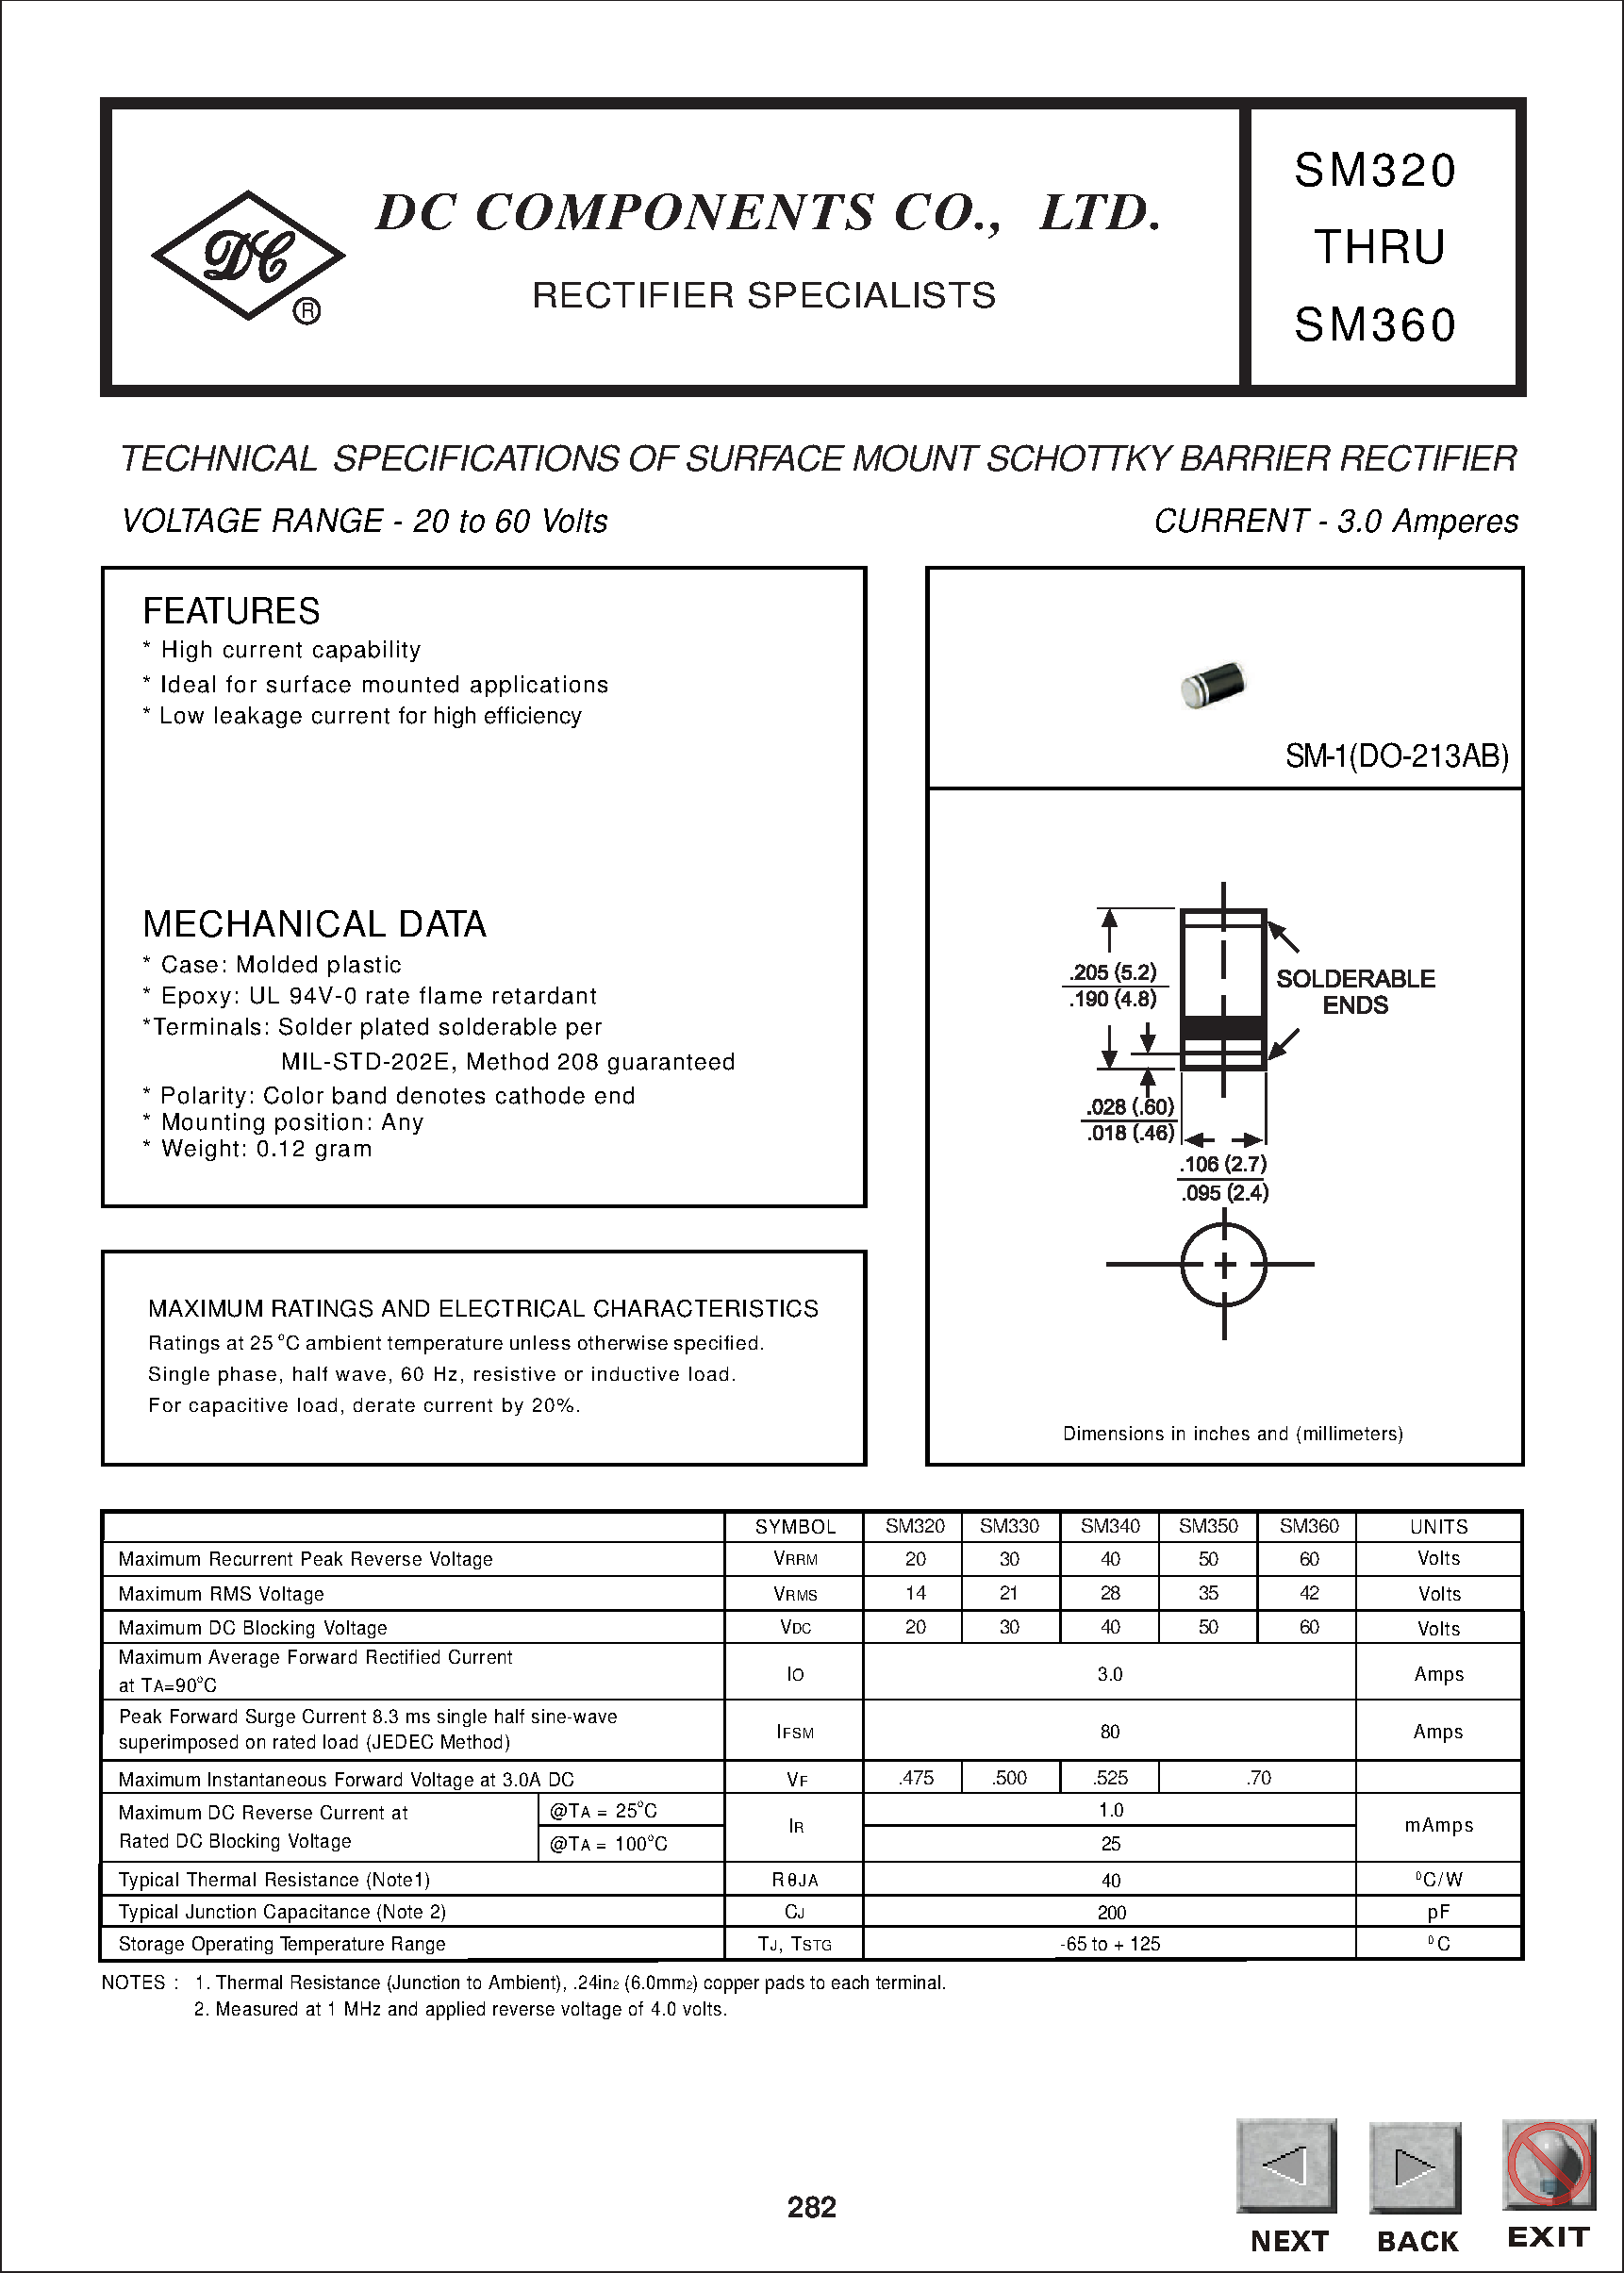 Datasheet SM360 - TECHNICAL SPECIFICATIONS OF SURFACE MOUNT SCHOTTKY BARRIER RECTIFIER page 1